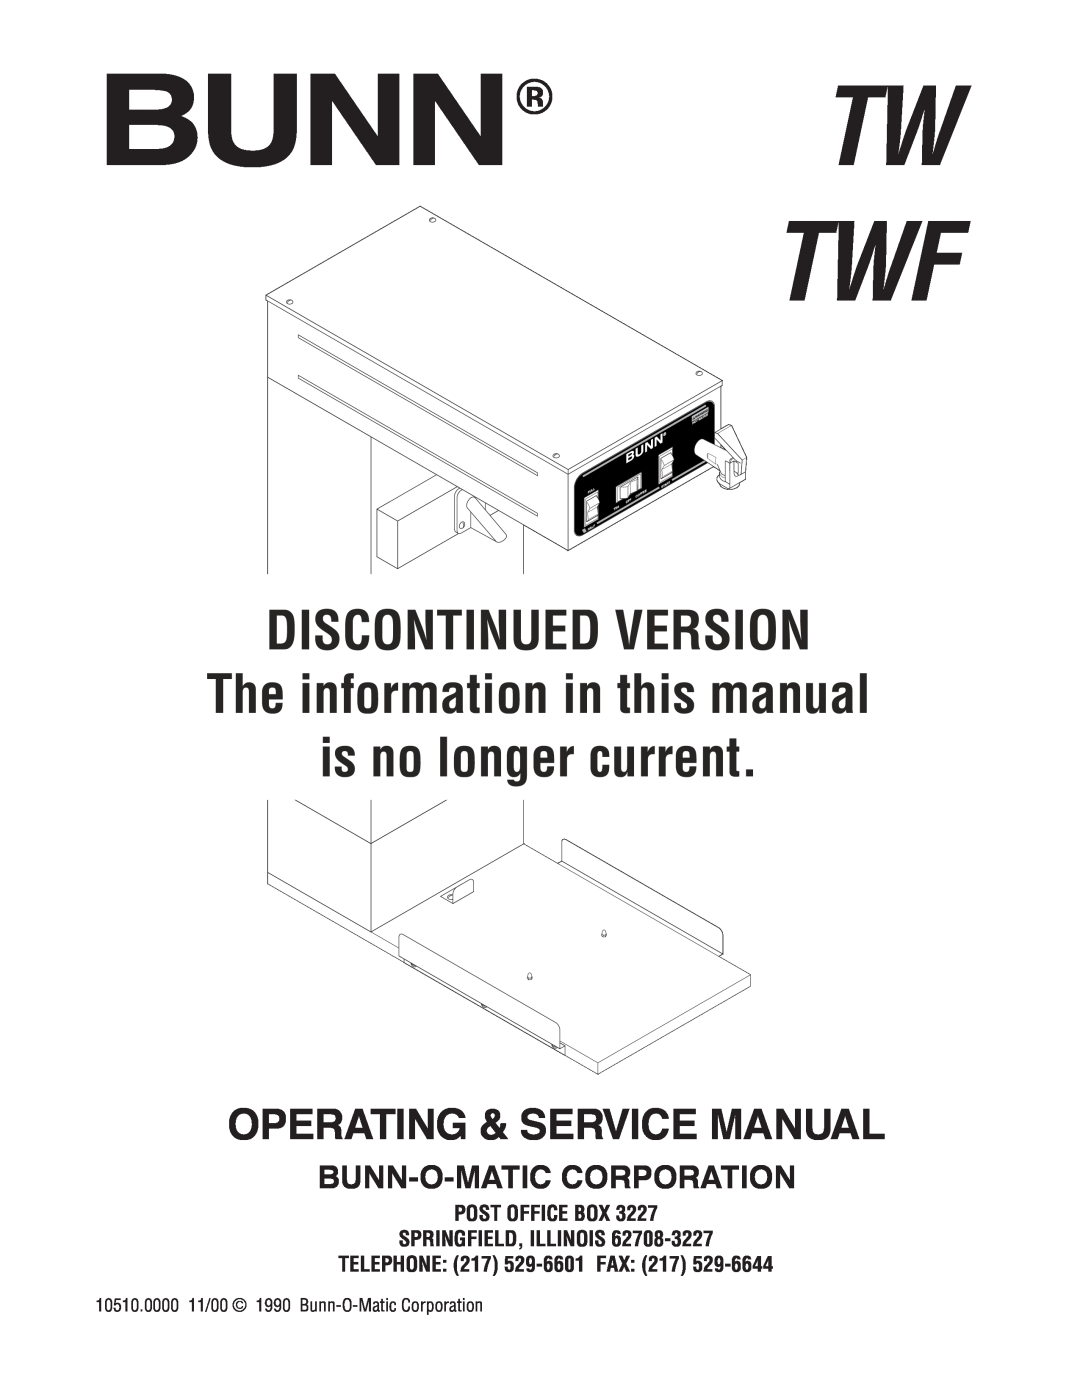 Bunn TWF service manual Bunn Tw, Discontinued Version, The information in this manual, is no longer current 